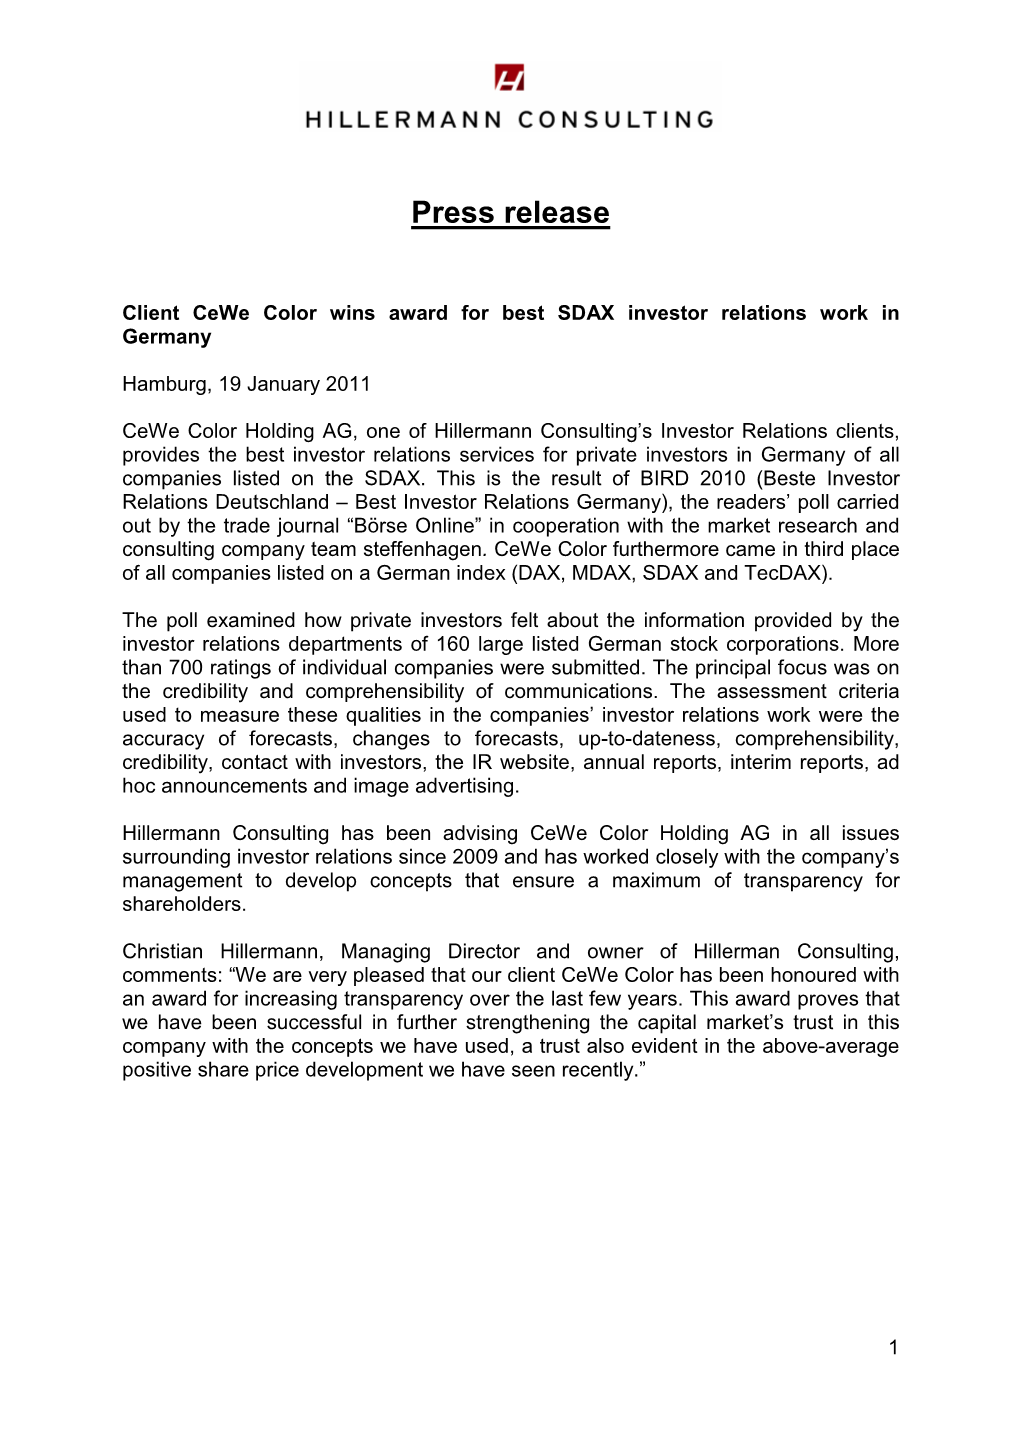 Press Release Hillermann Consulting 19.01.2011